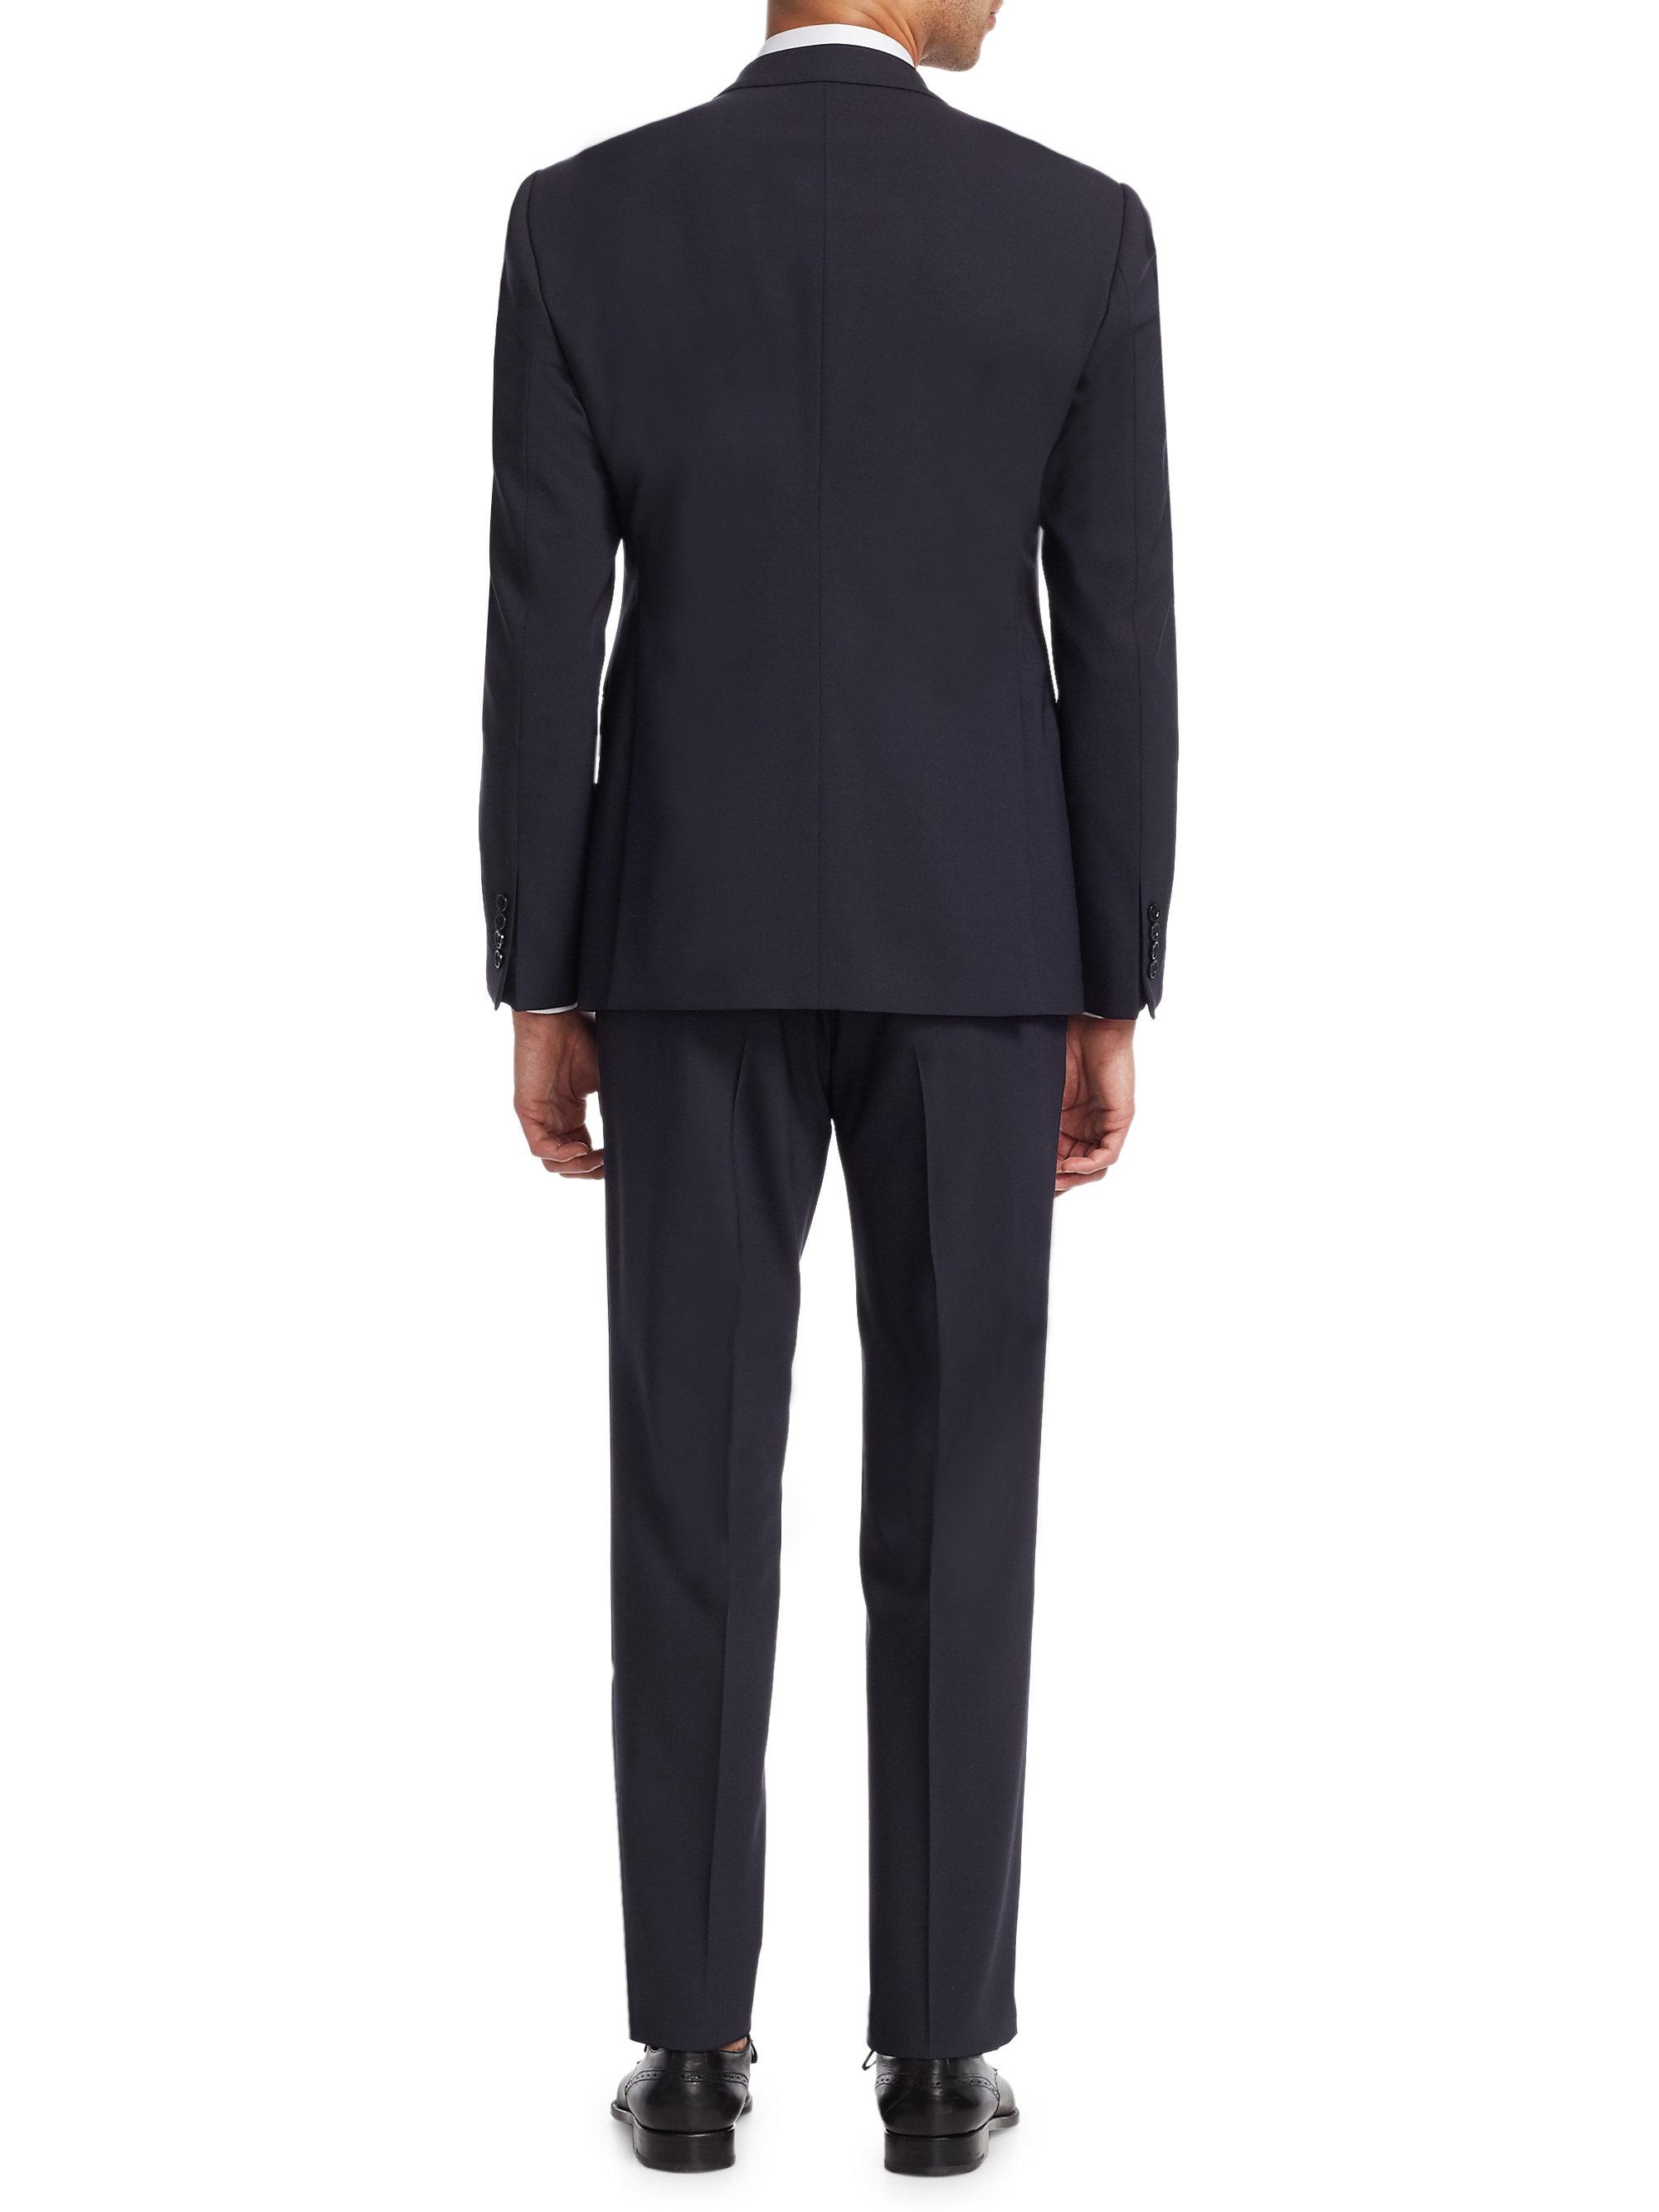 Emporio Armani M Line Navy Stretch Wool Suit in Blue for Men - Lyst